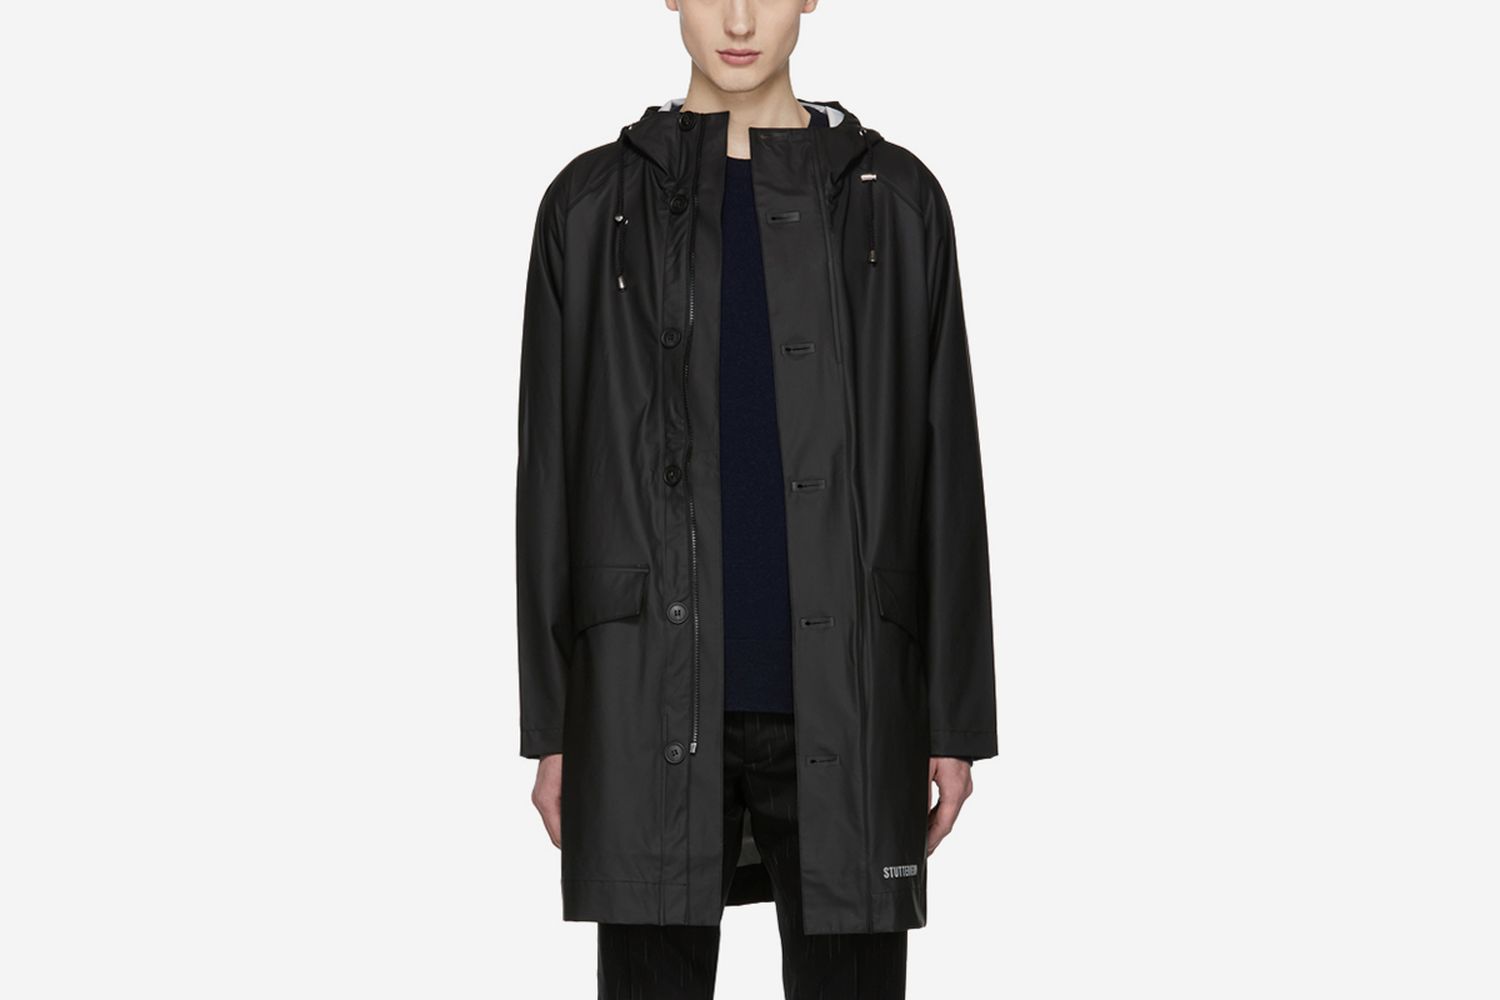 10 Of Our Favorite Rain Jackets For Every Budget